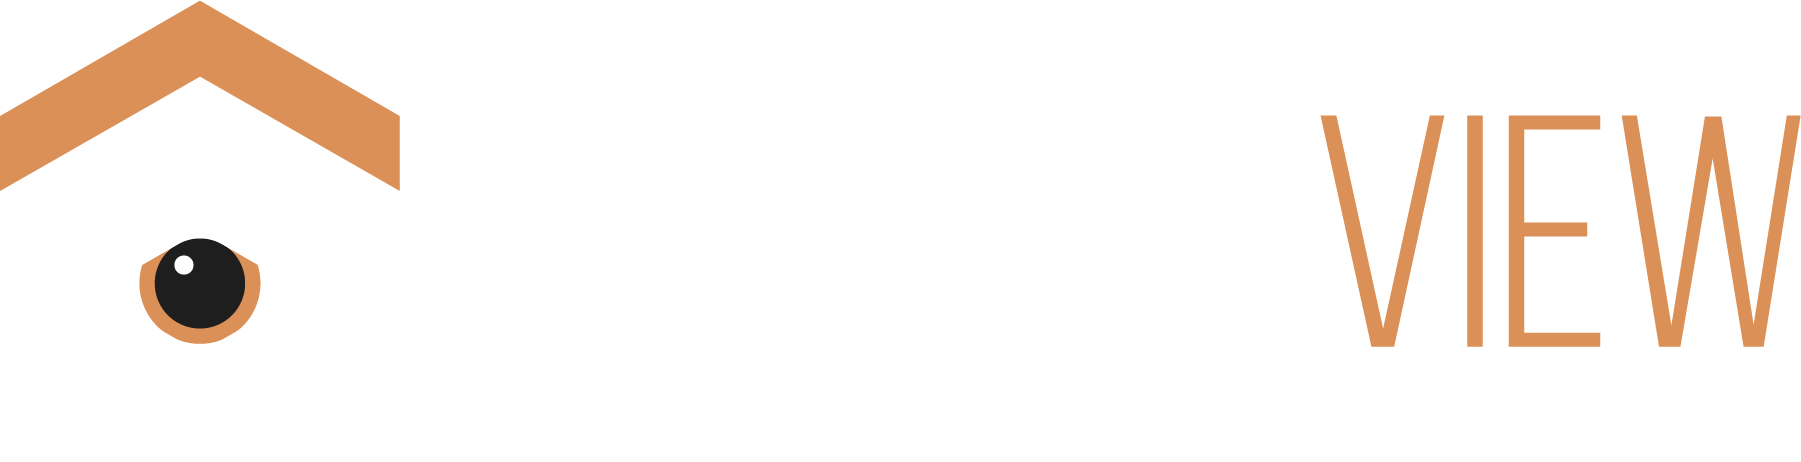 cropped-cropped-Amazon-view_LOGO.png